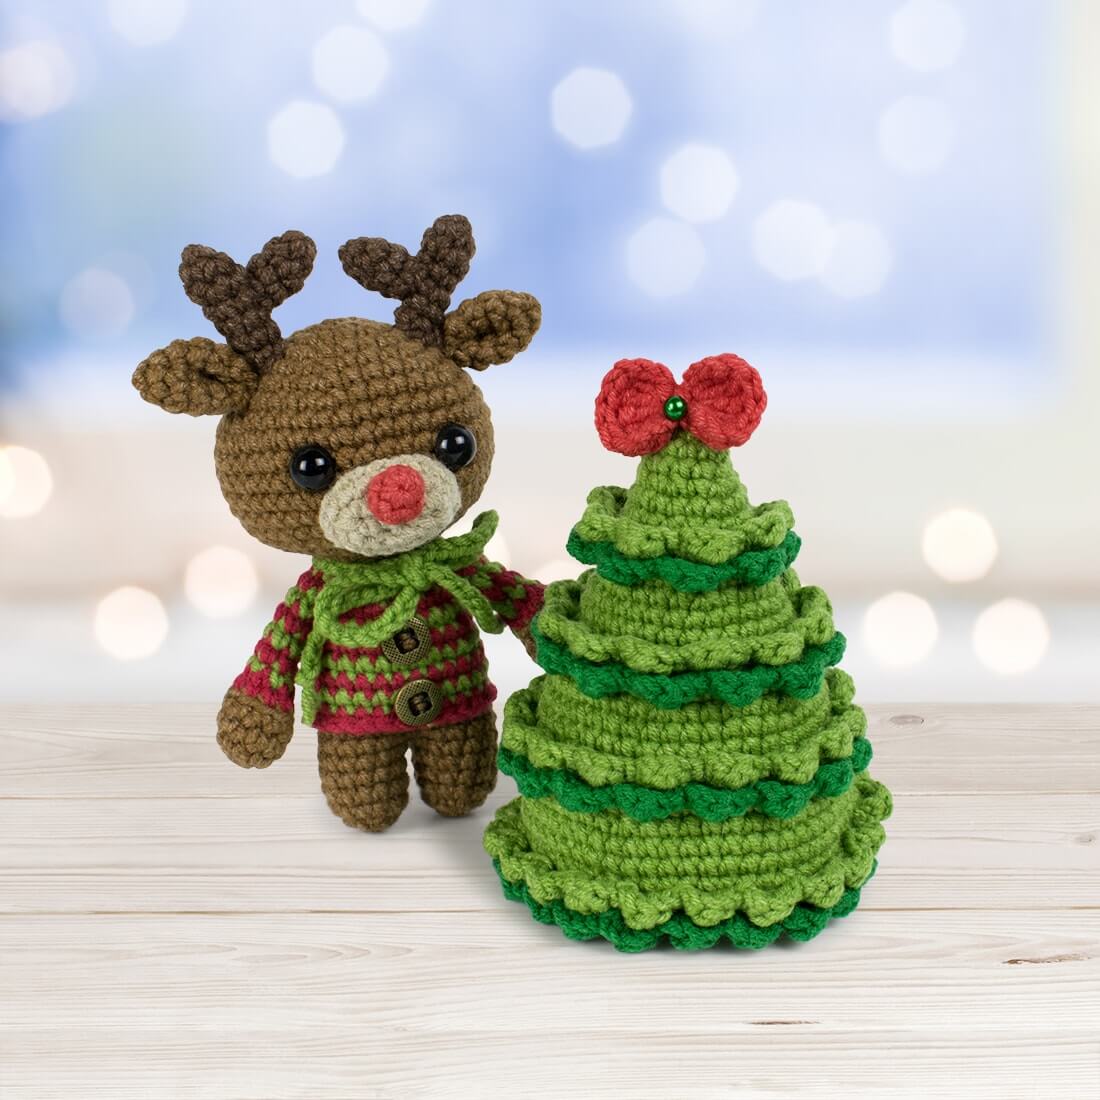 Super Cute Christmas Tree With Deer Craft Idea For WintersCrochet Christmas Tree Patterns 